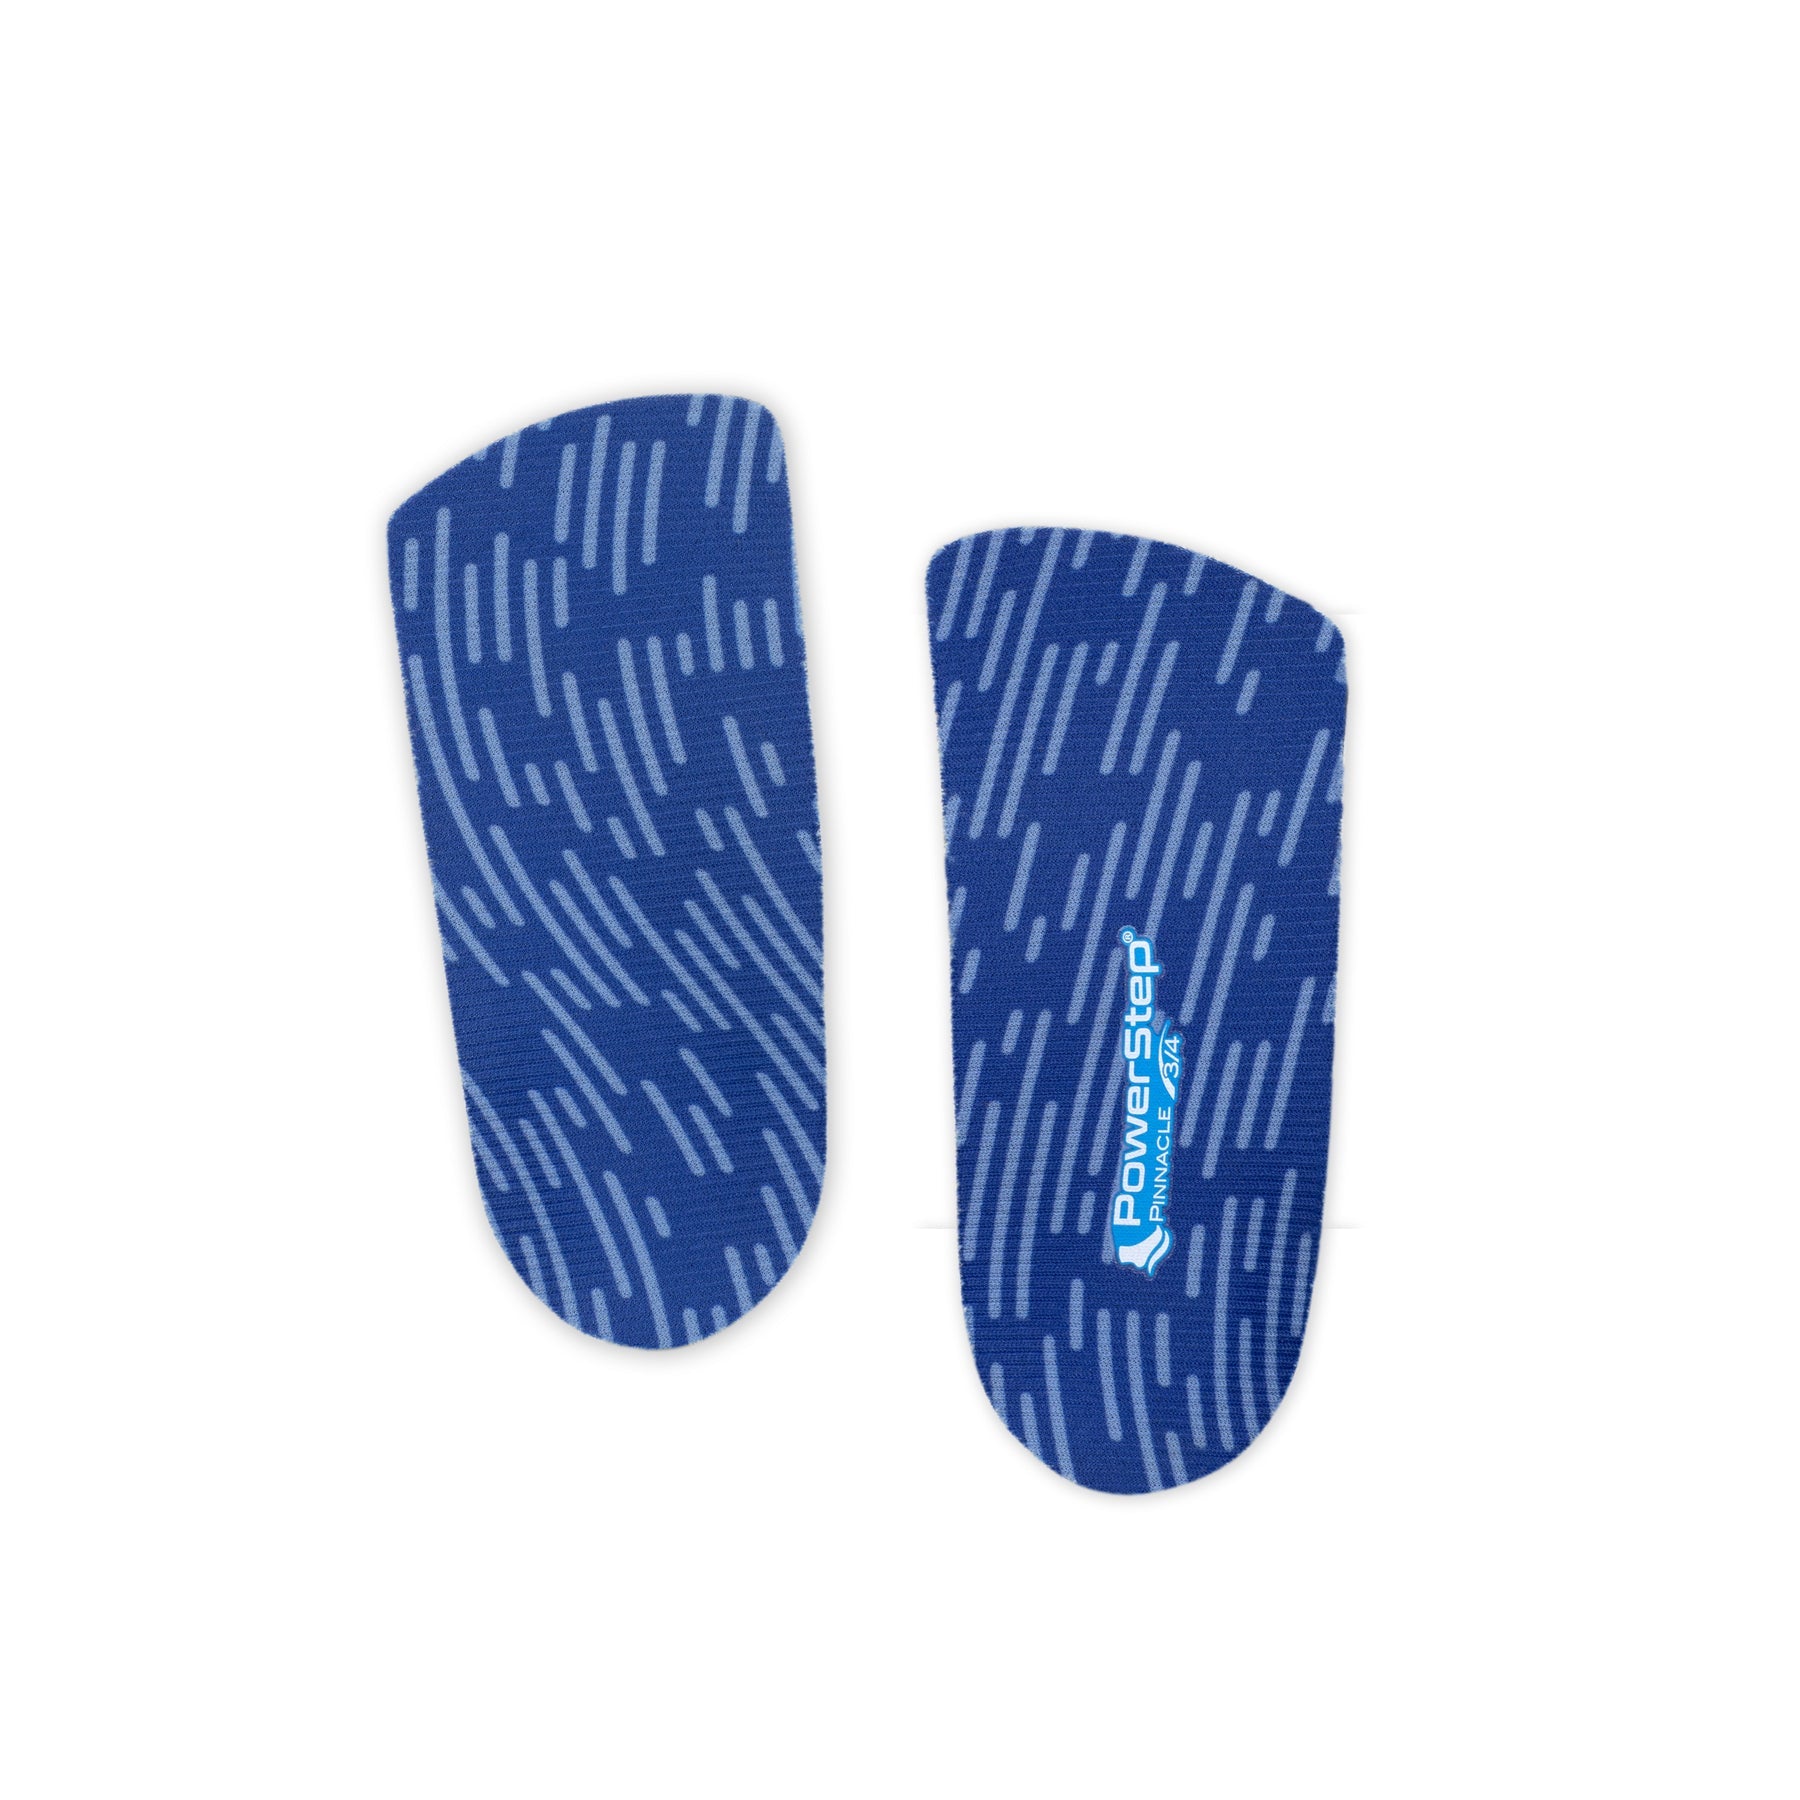 SlimTech 3/4 Length Arch Support Insole